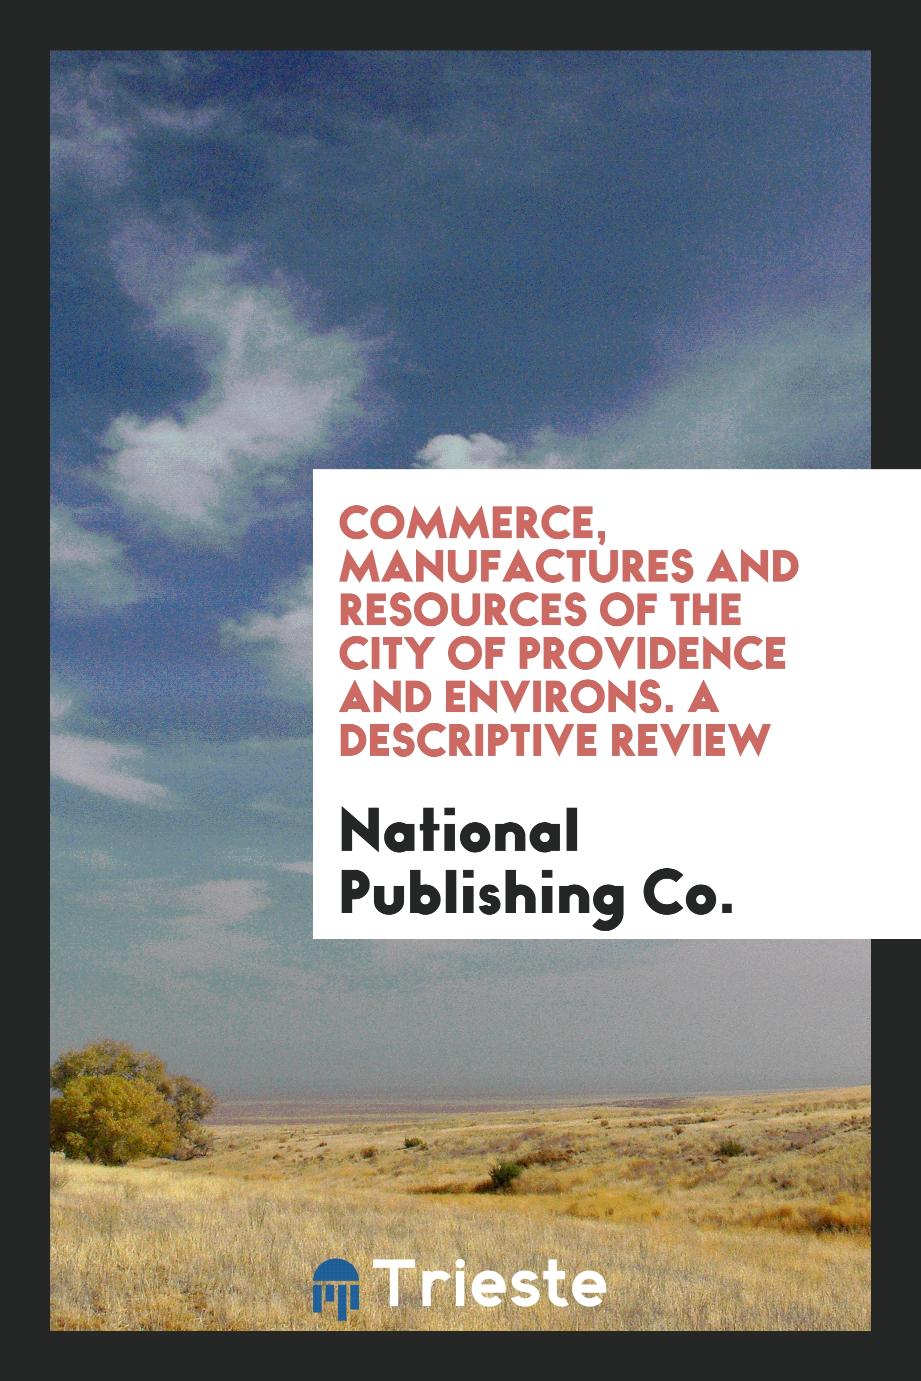 Commerce, Manufactures and Resources of the City of Providence and Environs. A Descriptive Review